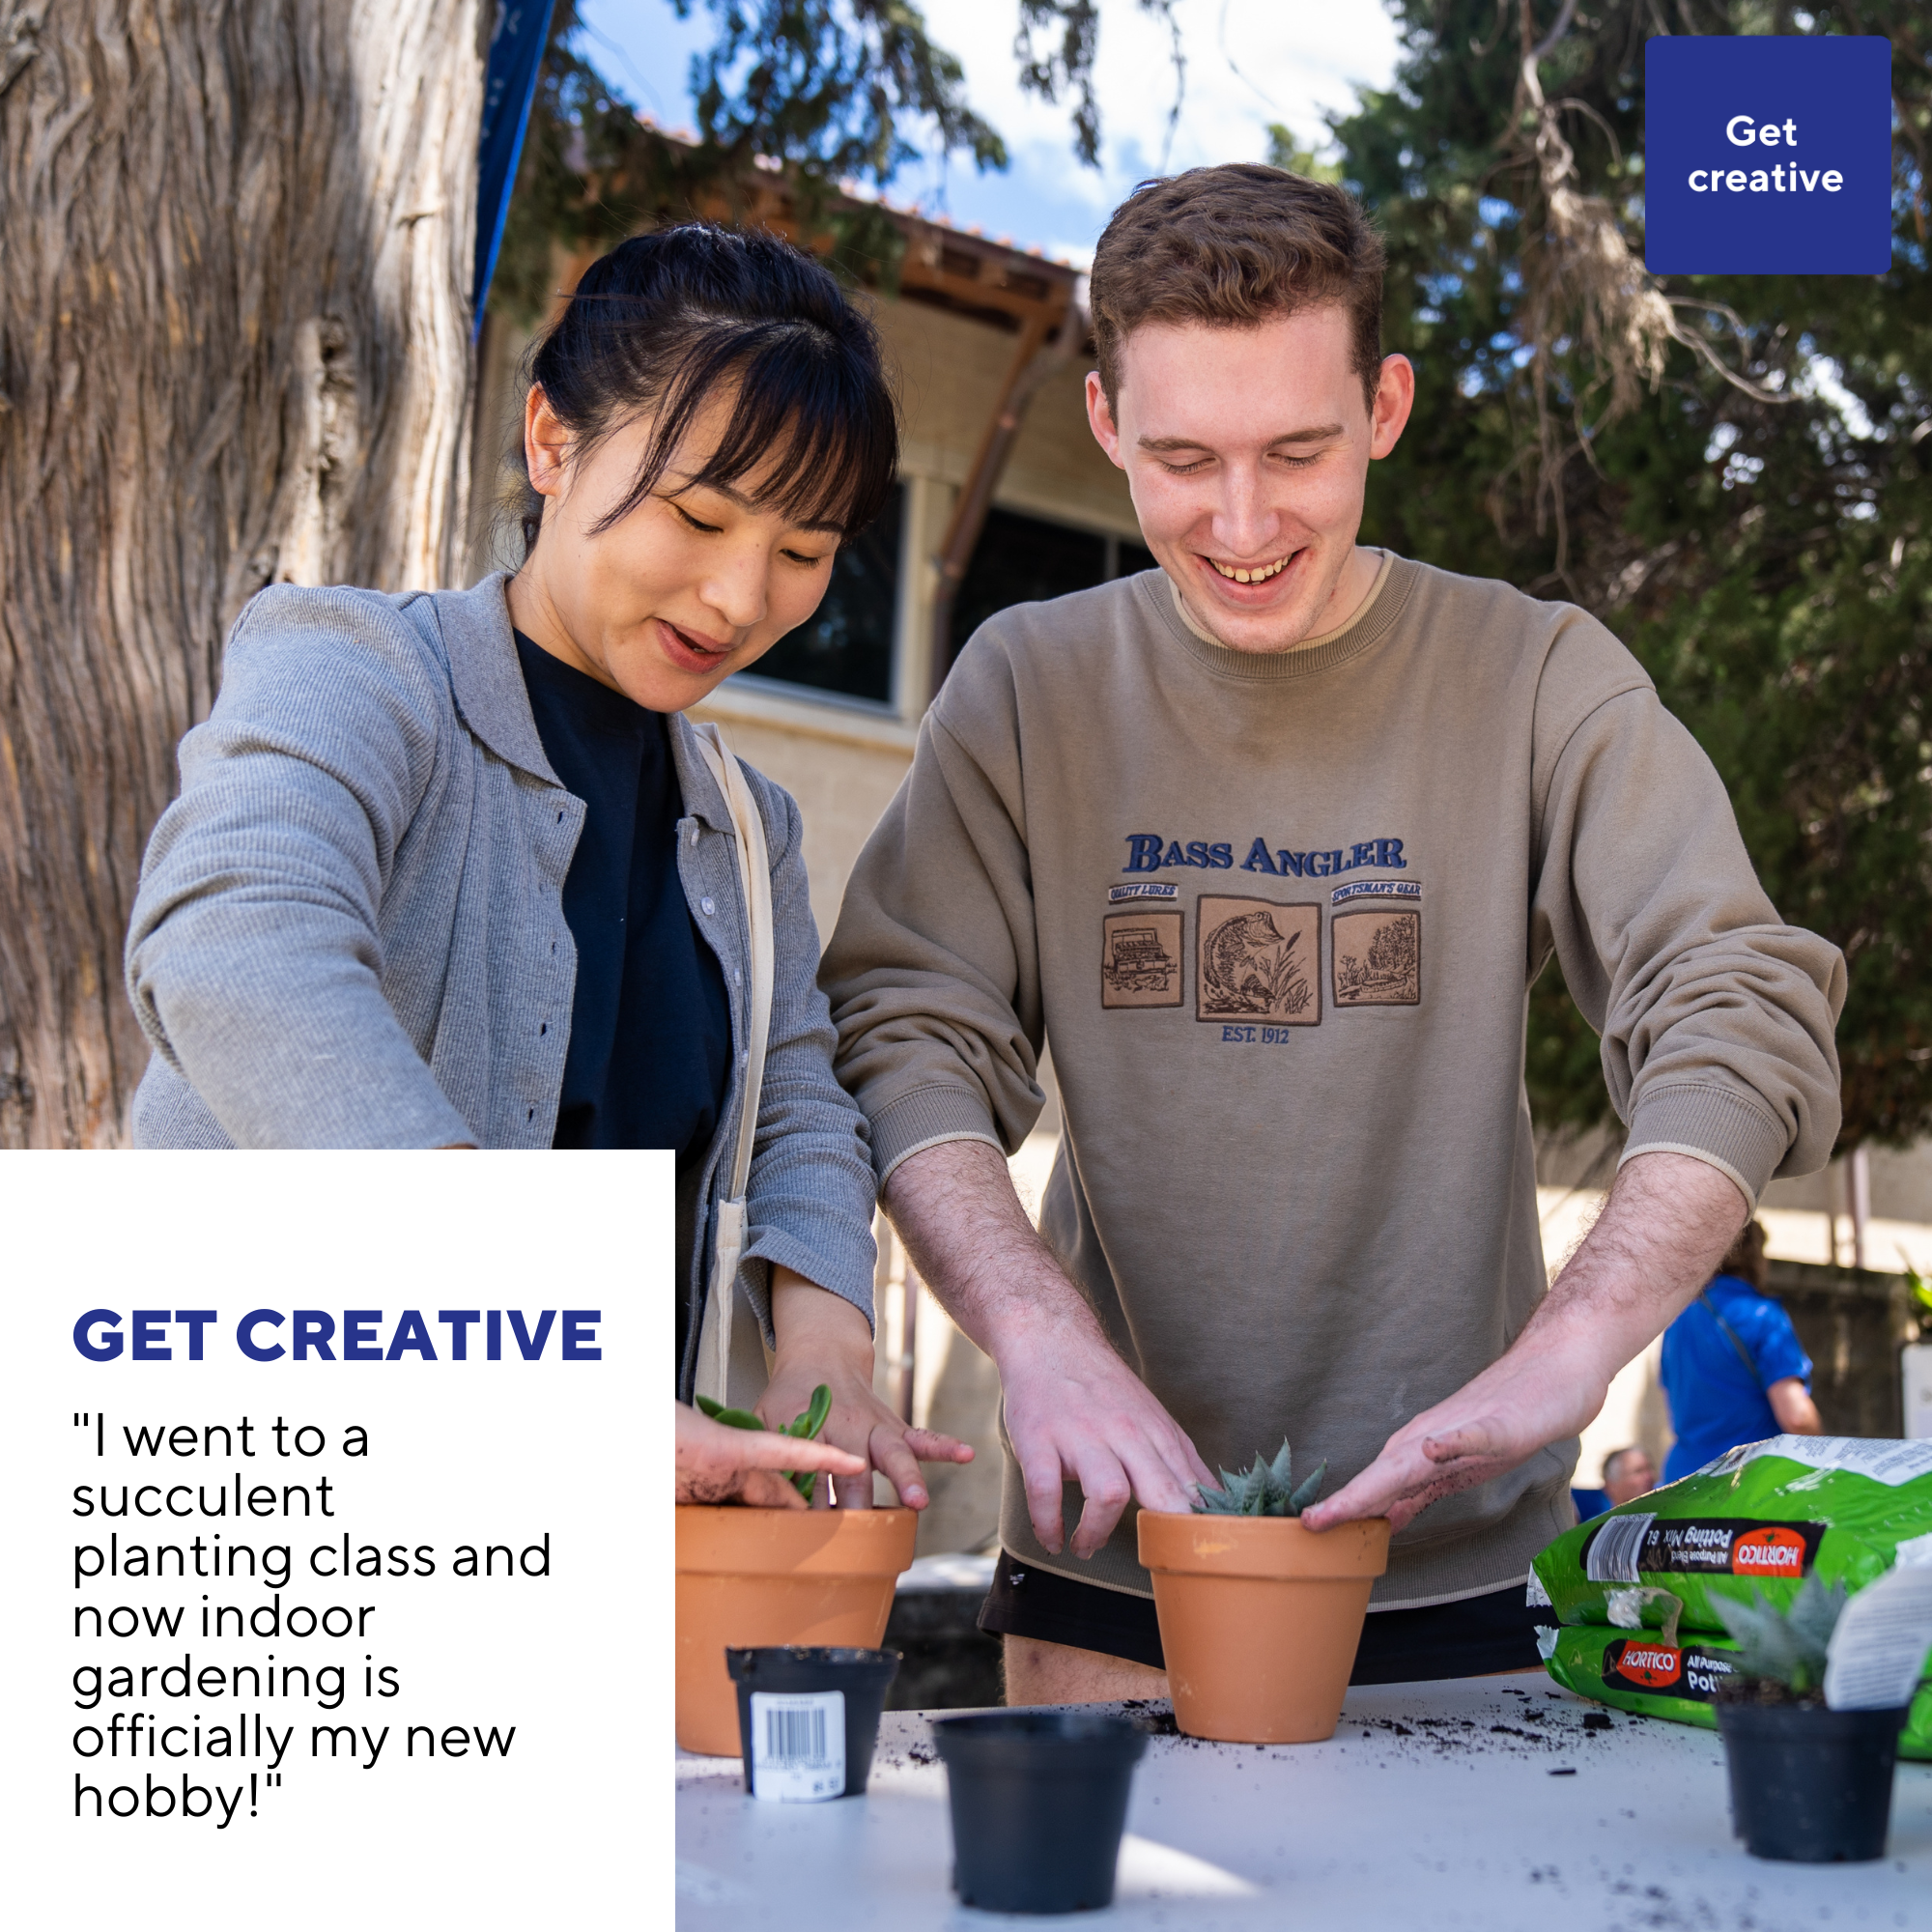 Two students get creative to build their wellbeing at UWA planting succulents